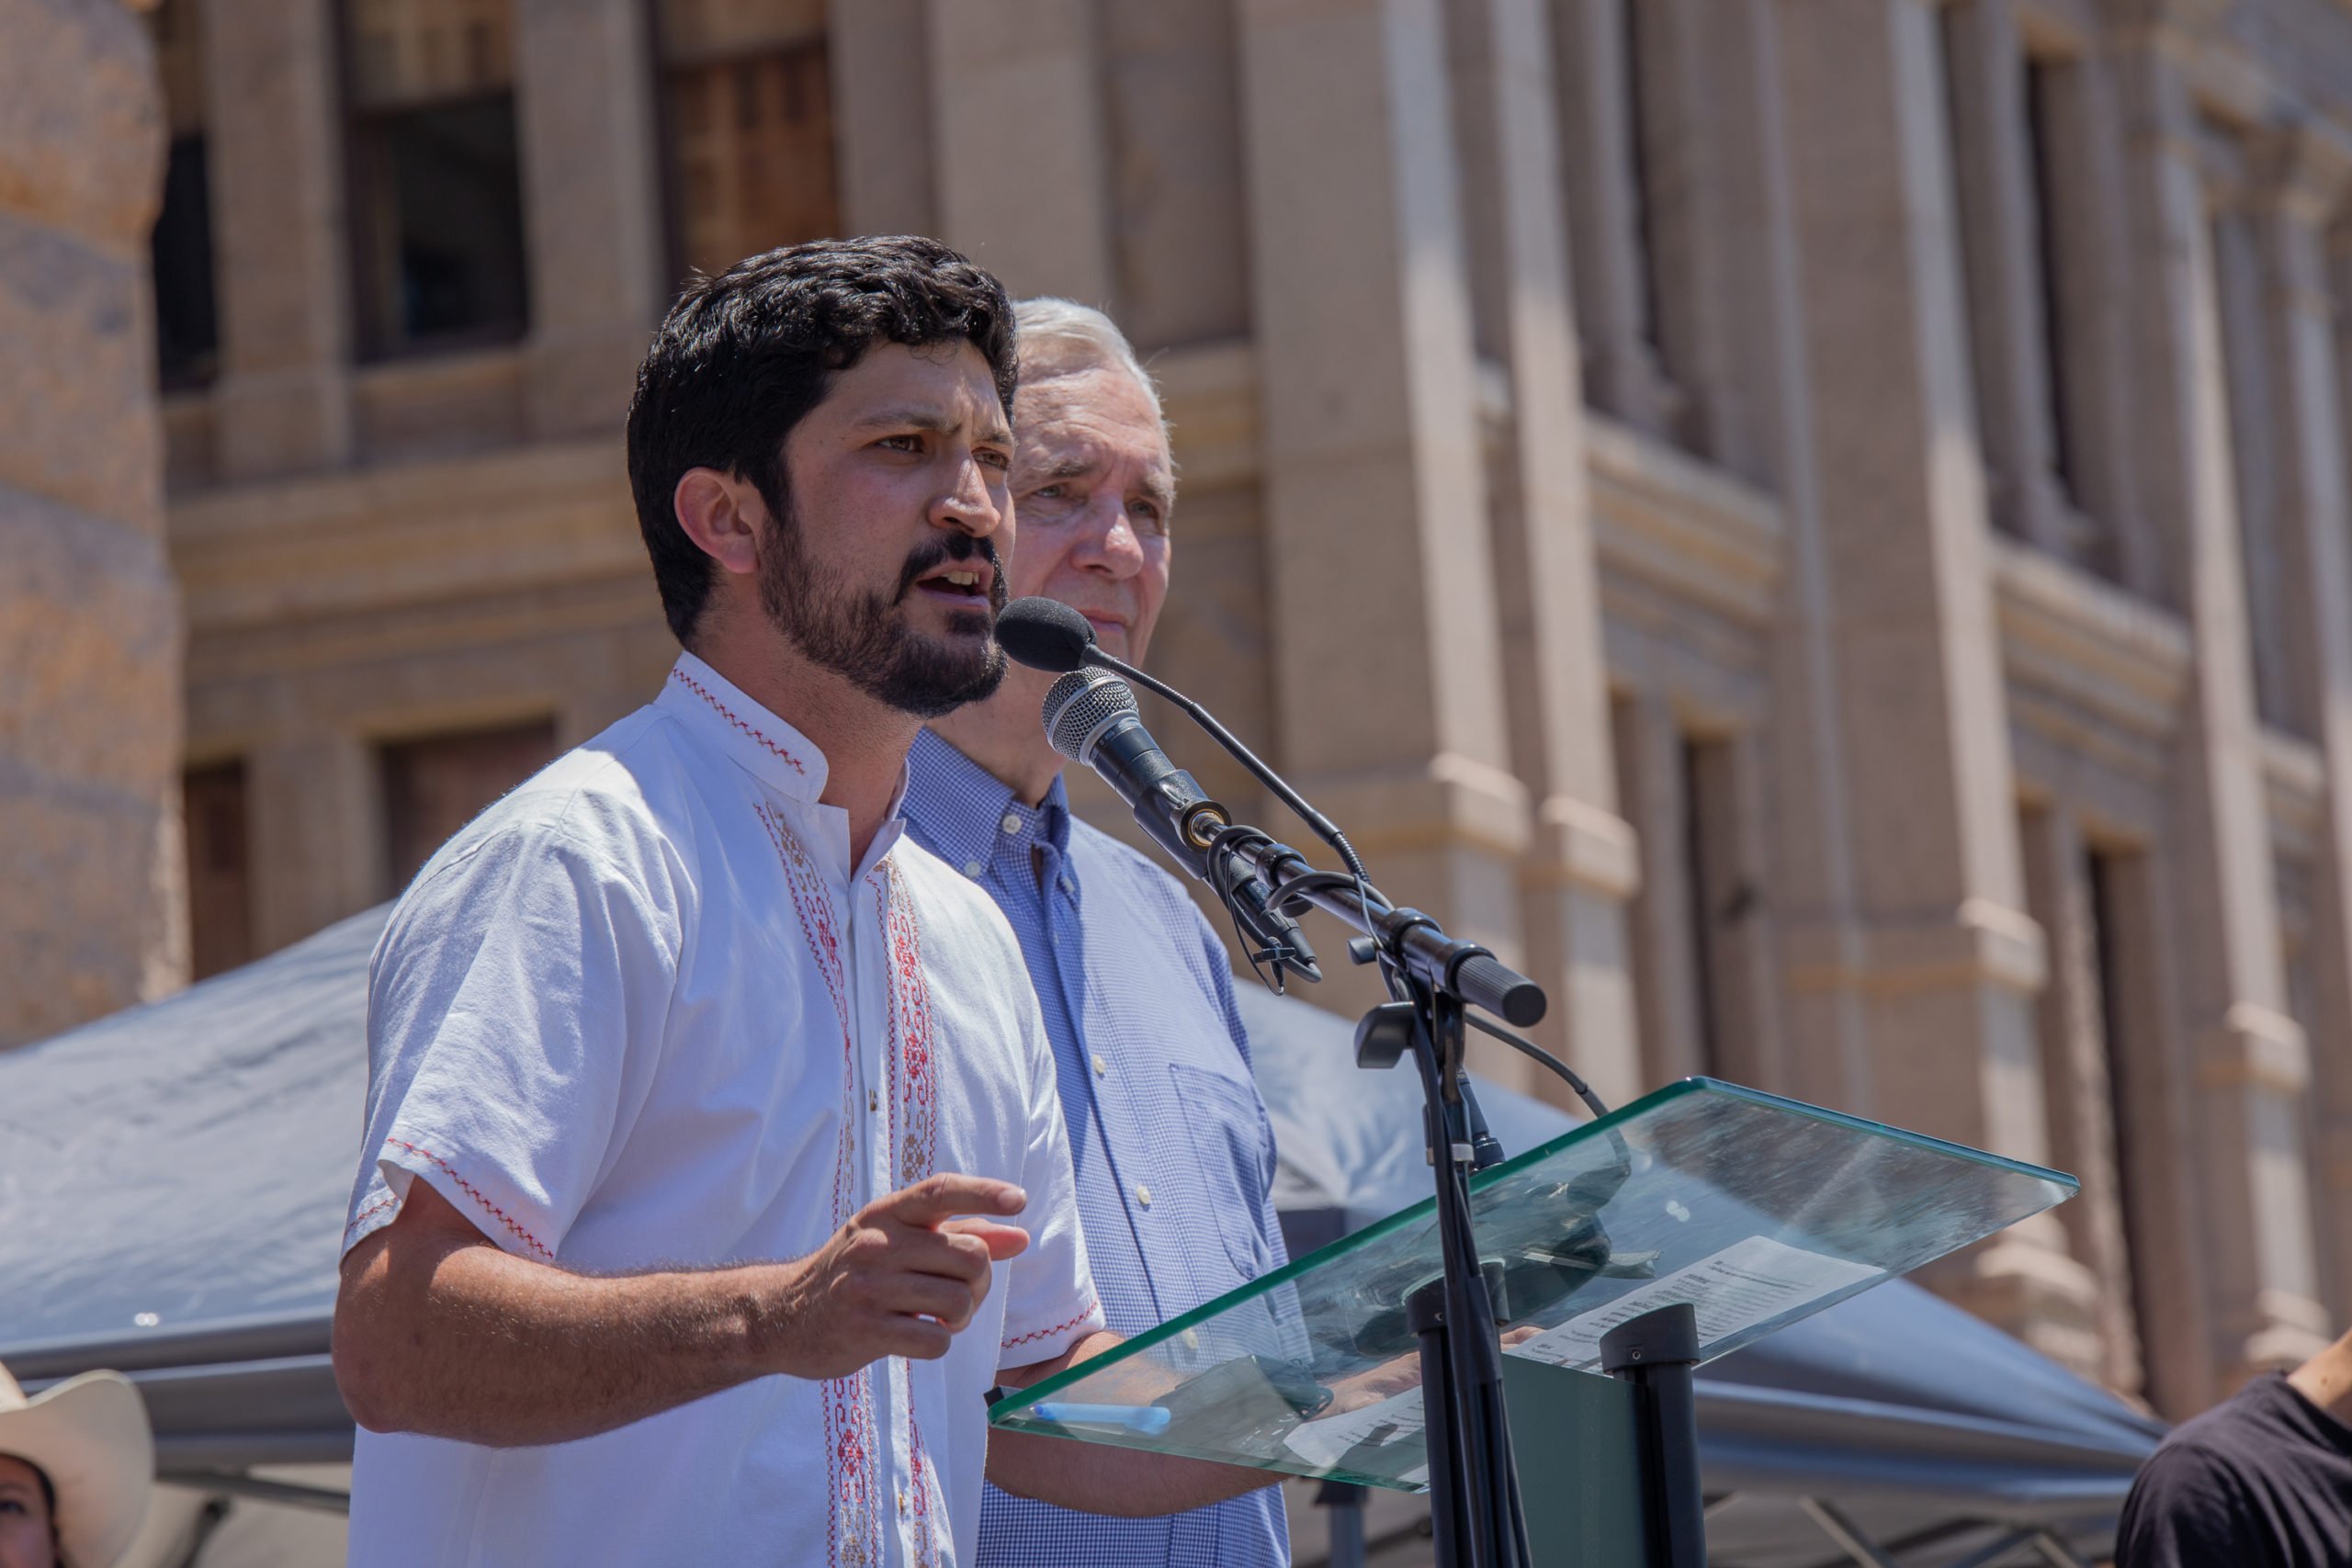 Greg Casar, wearing a white button-down shirt, speaks at a podium while standing next to Lloyd Doggett (who is wearing a blue button-down shirt).